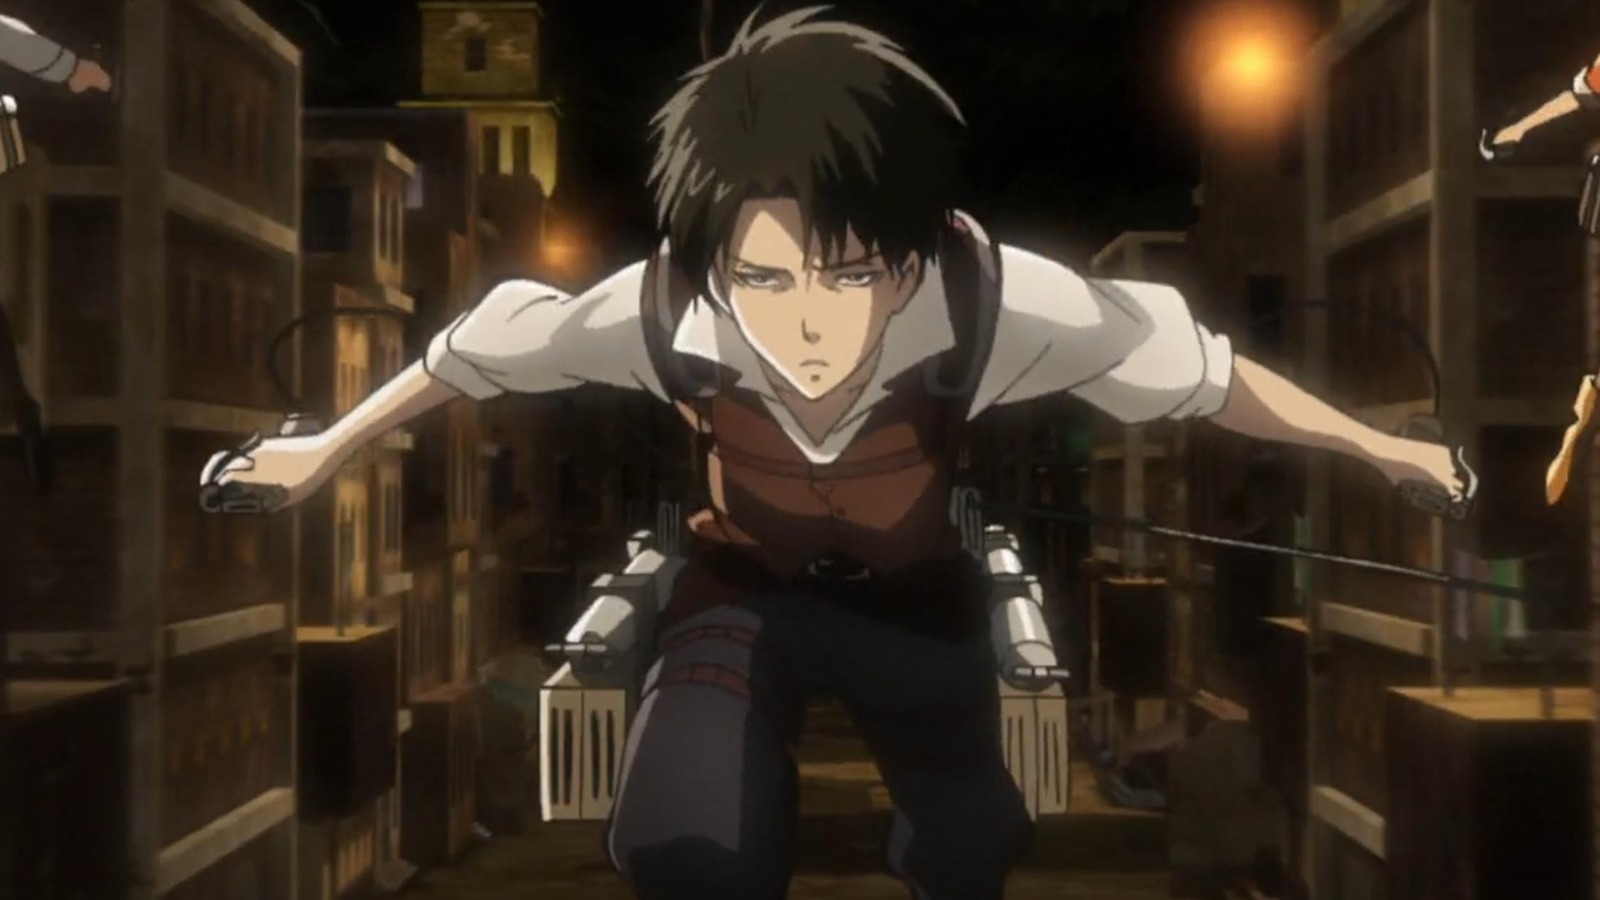 Could We Get An Attack On Titan Spin-Off Centered On Levi?